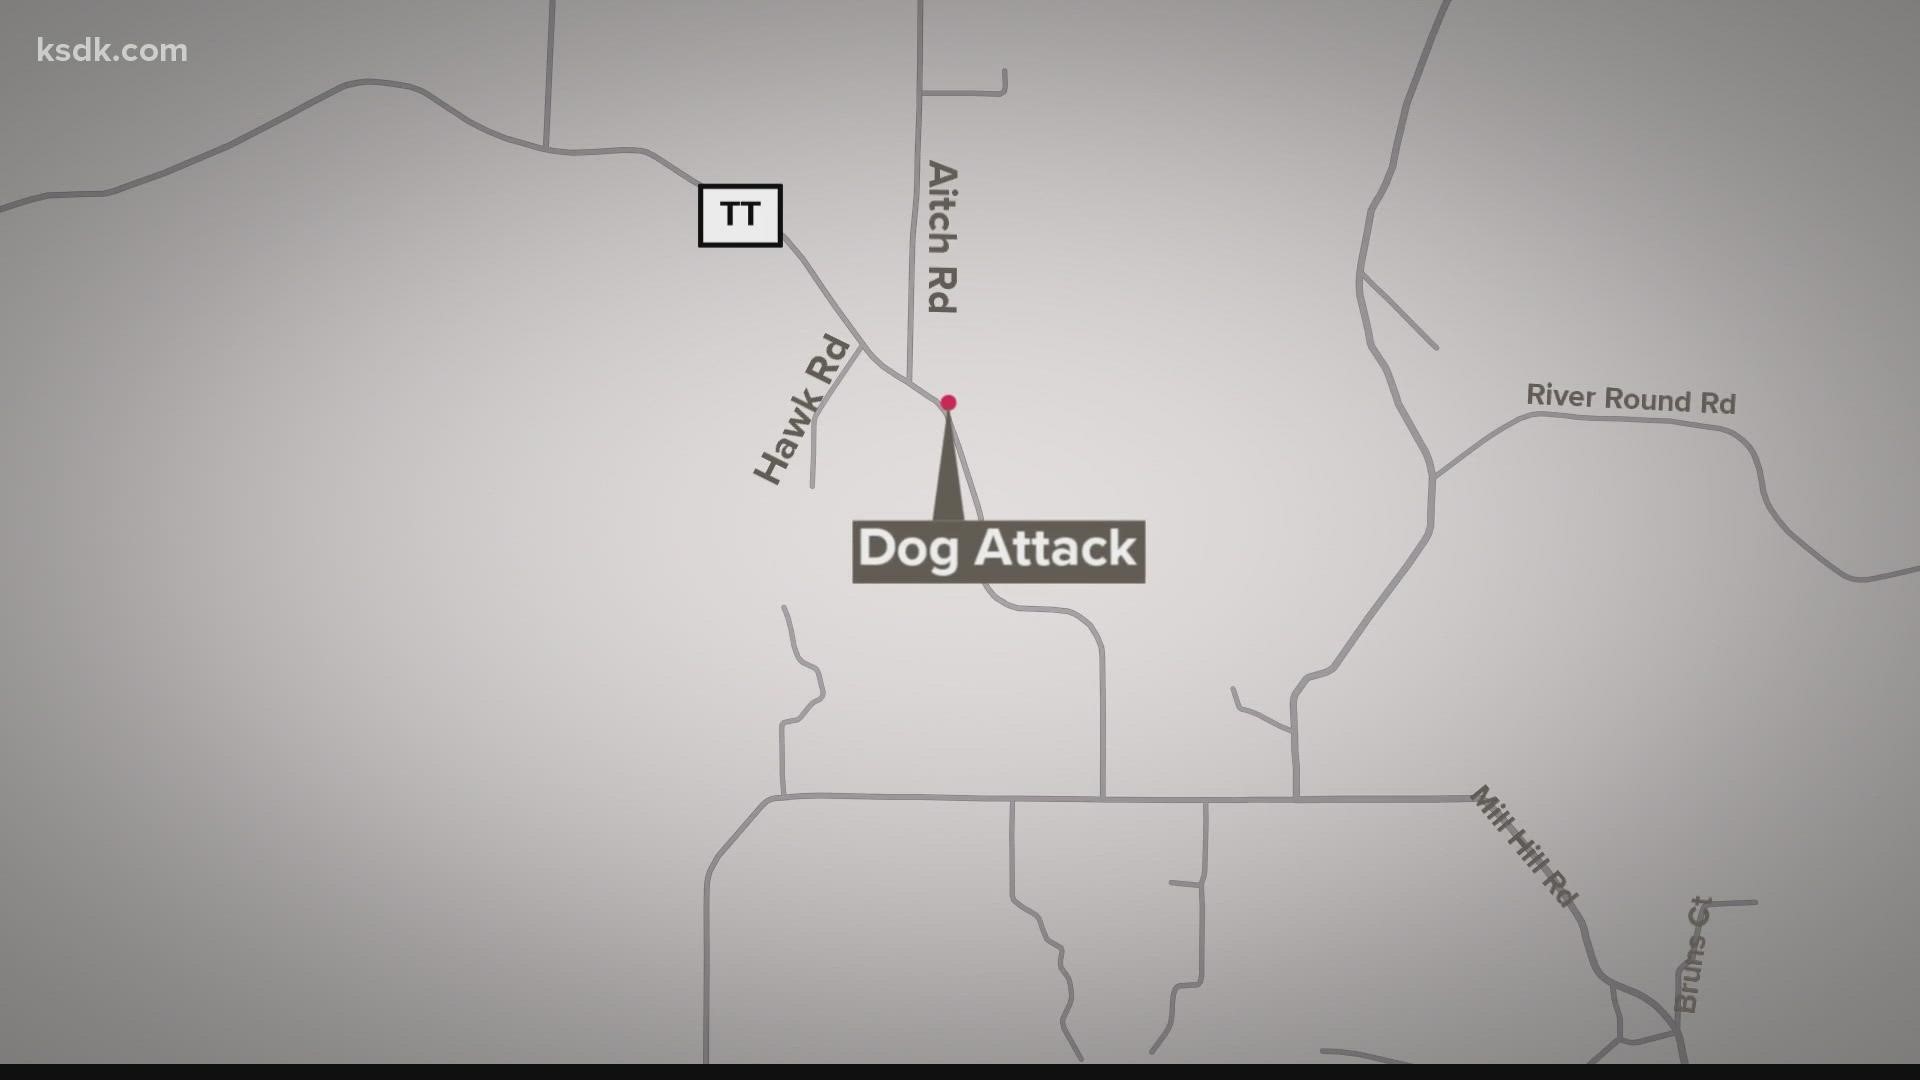 During their investigation, deputies found that the victim went to a relative's home, where she was attacked by dogs.